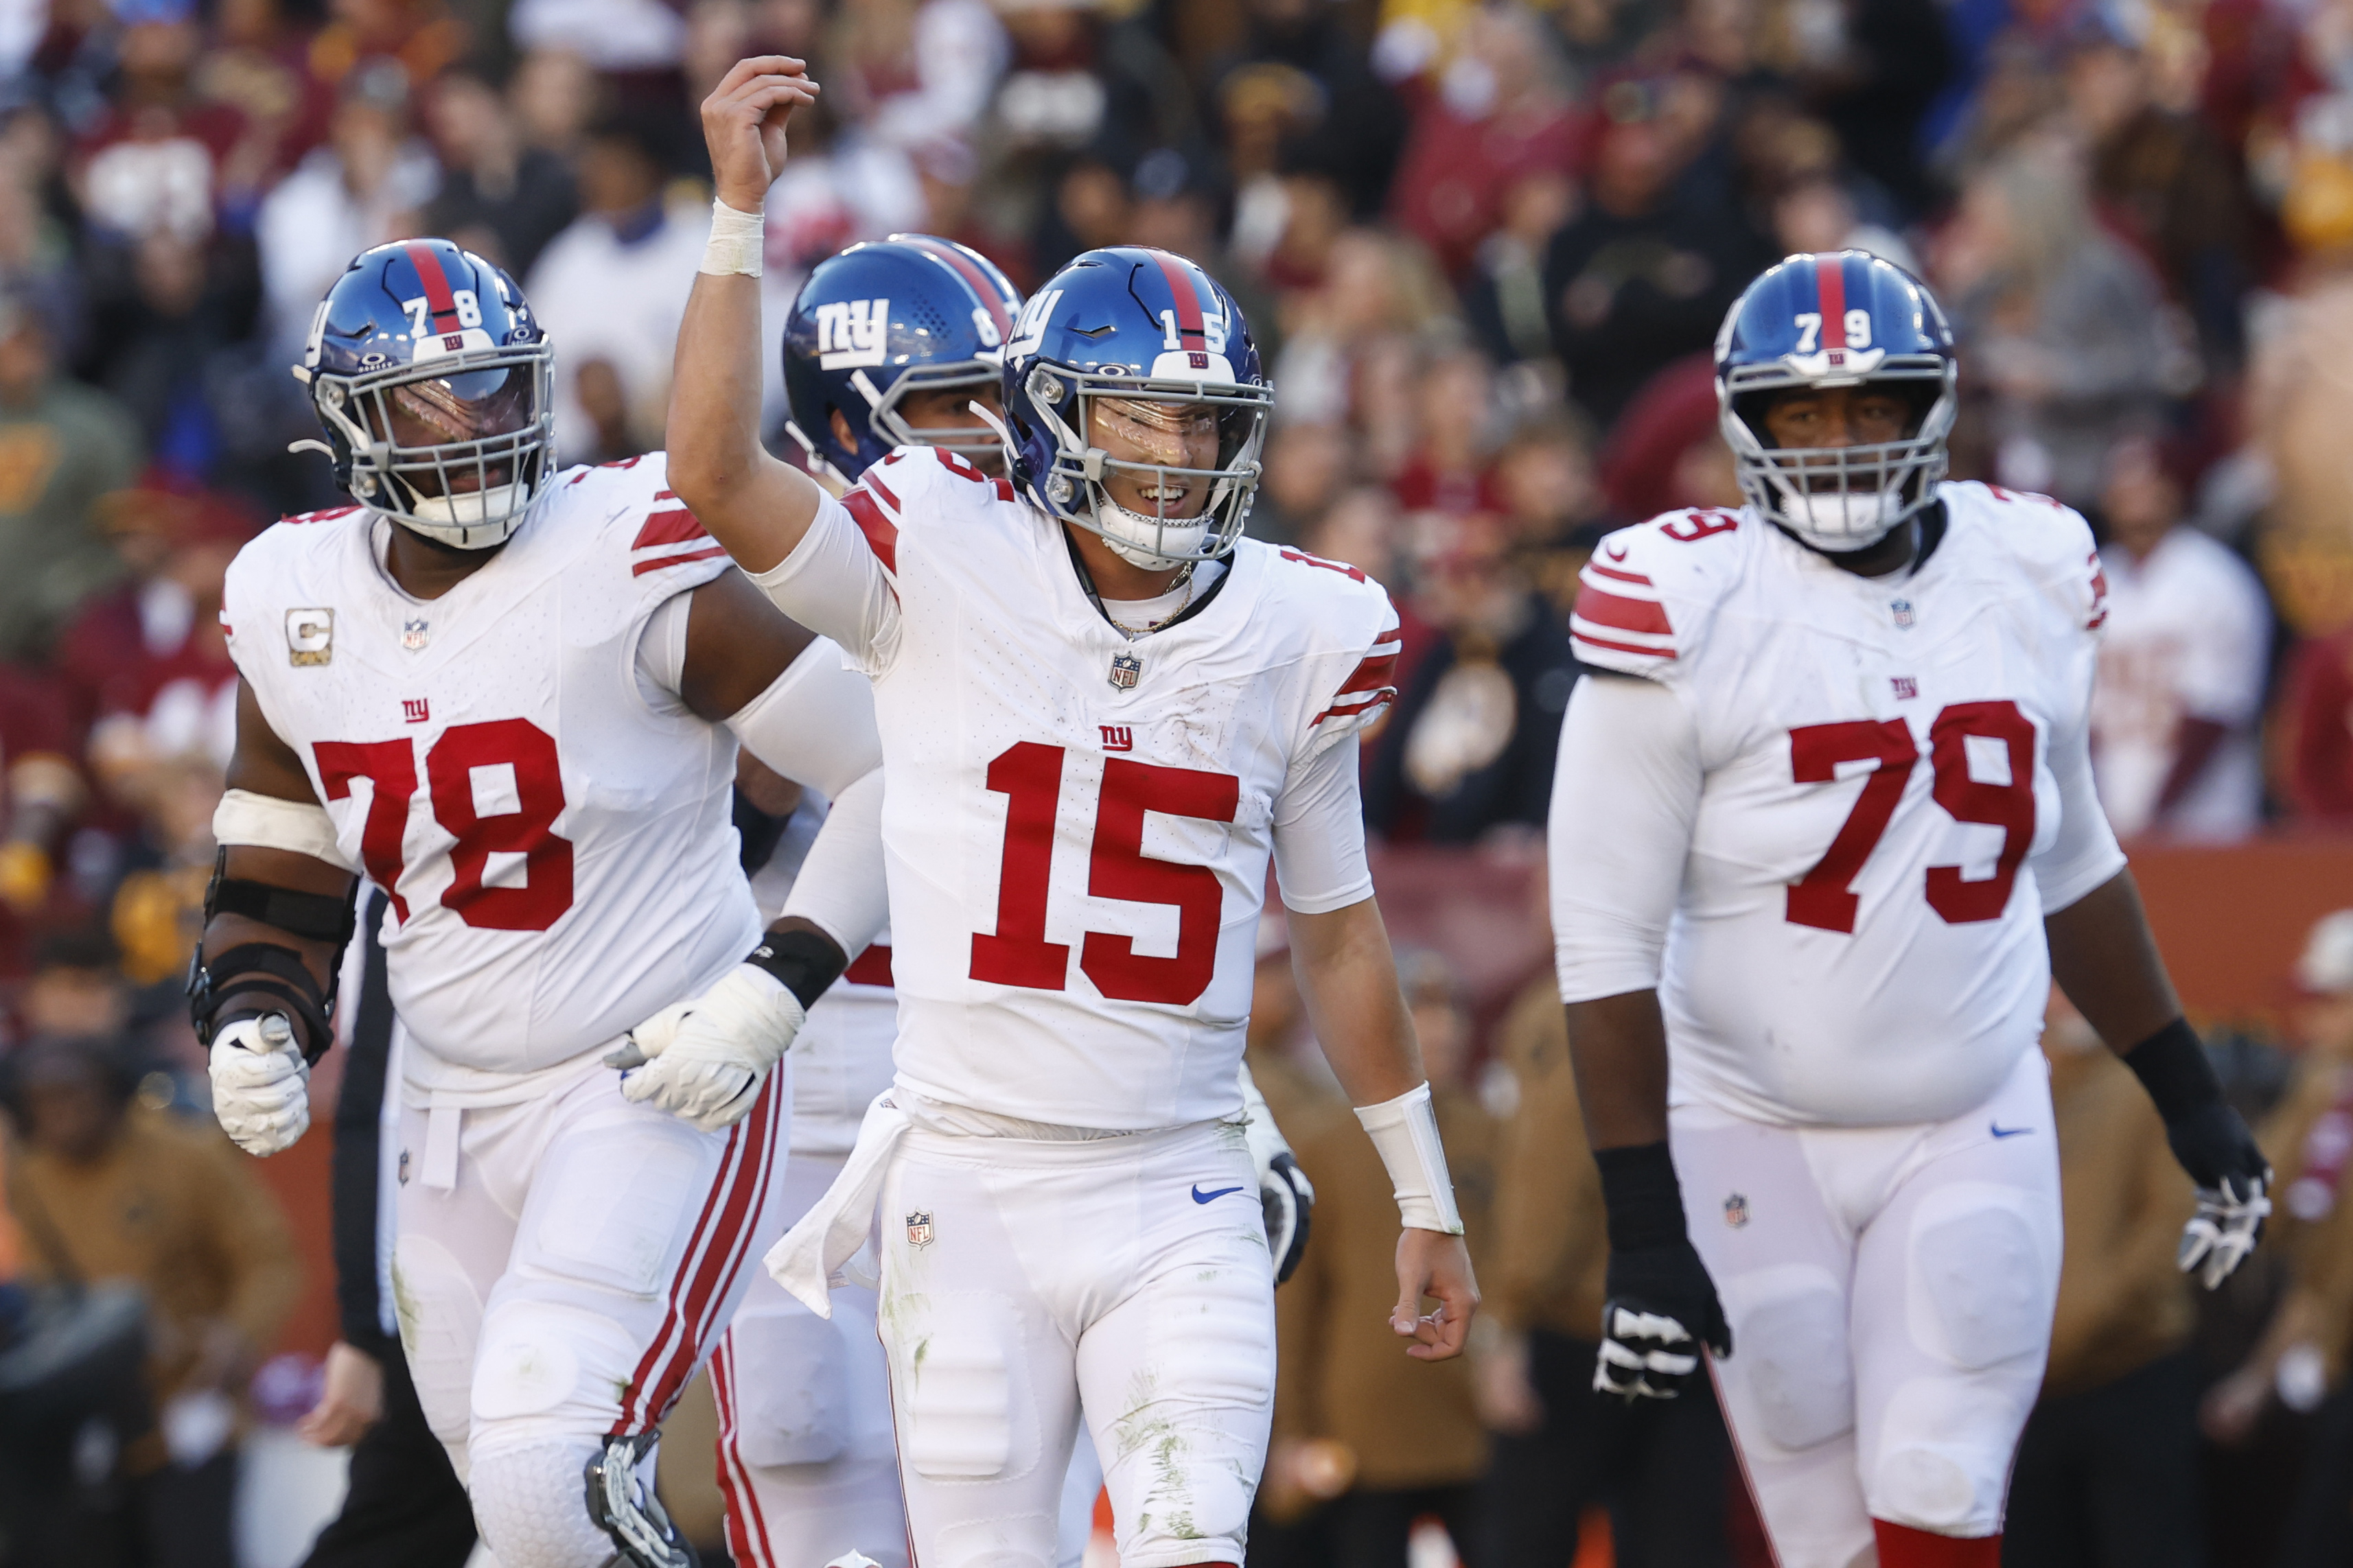 New York Giants quarterback Tommy DeVito (15) celebrates after throwing a touchdown pass against the Washington Commanders during the second quarter at FedExField